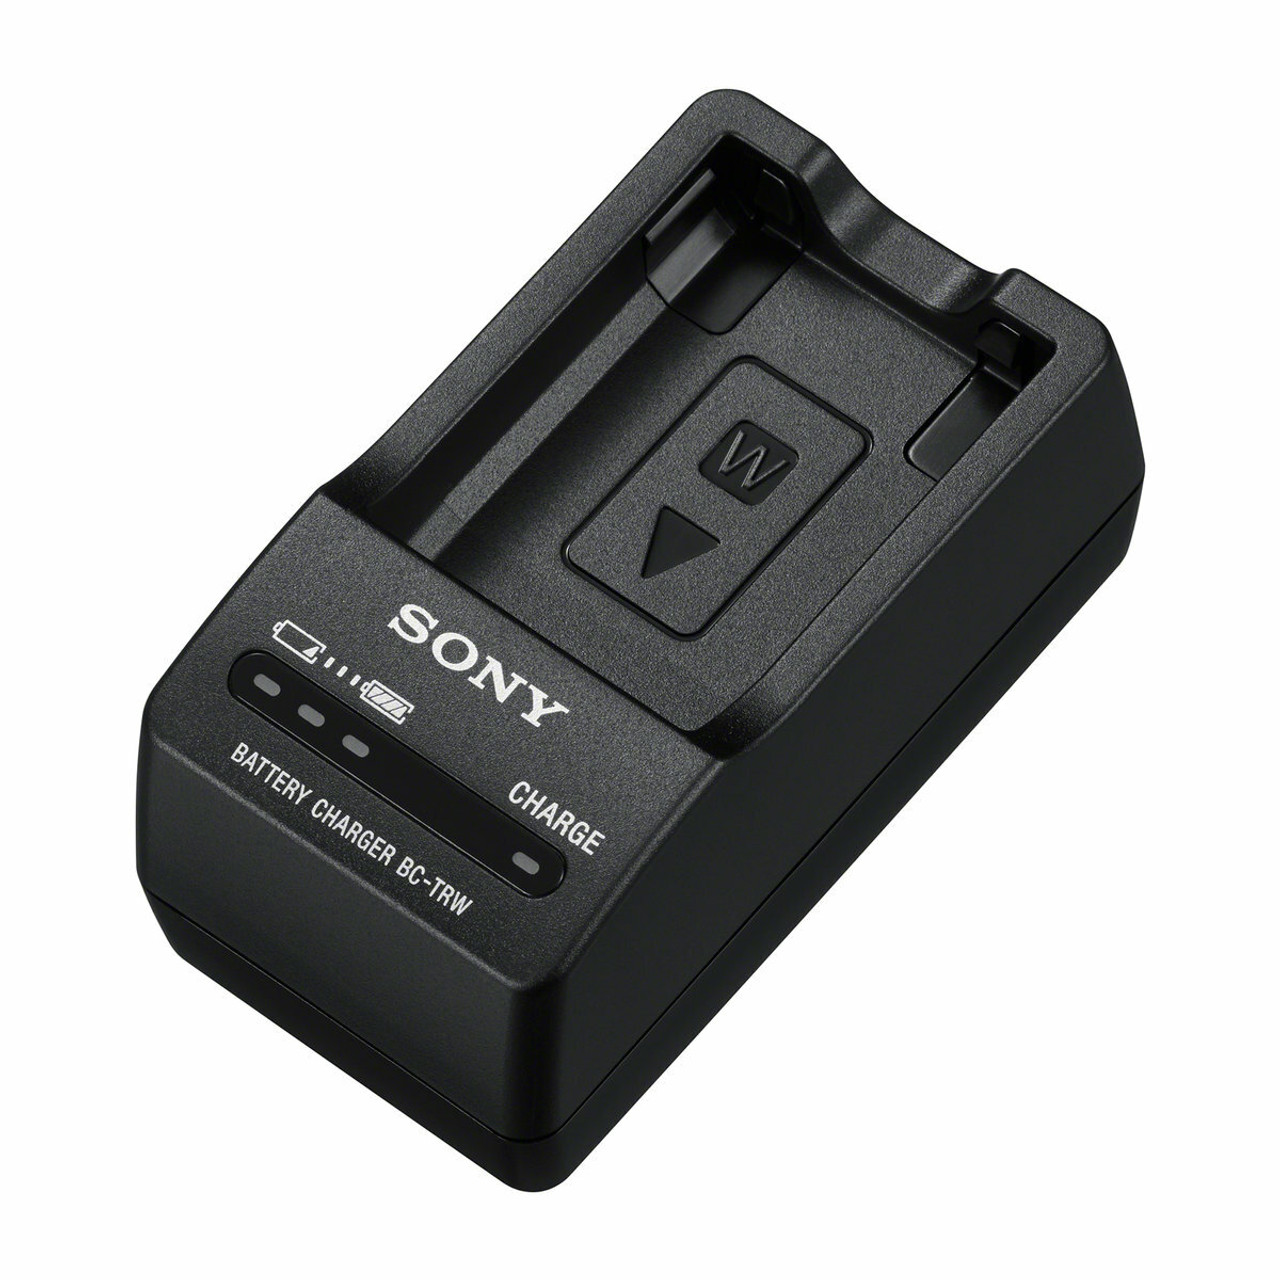 SONY 'W' BATTERY CHARGER BC-TRW